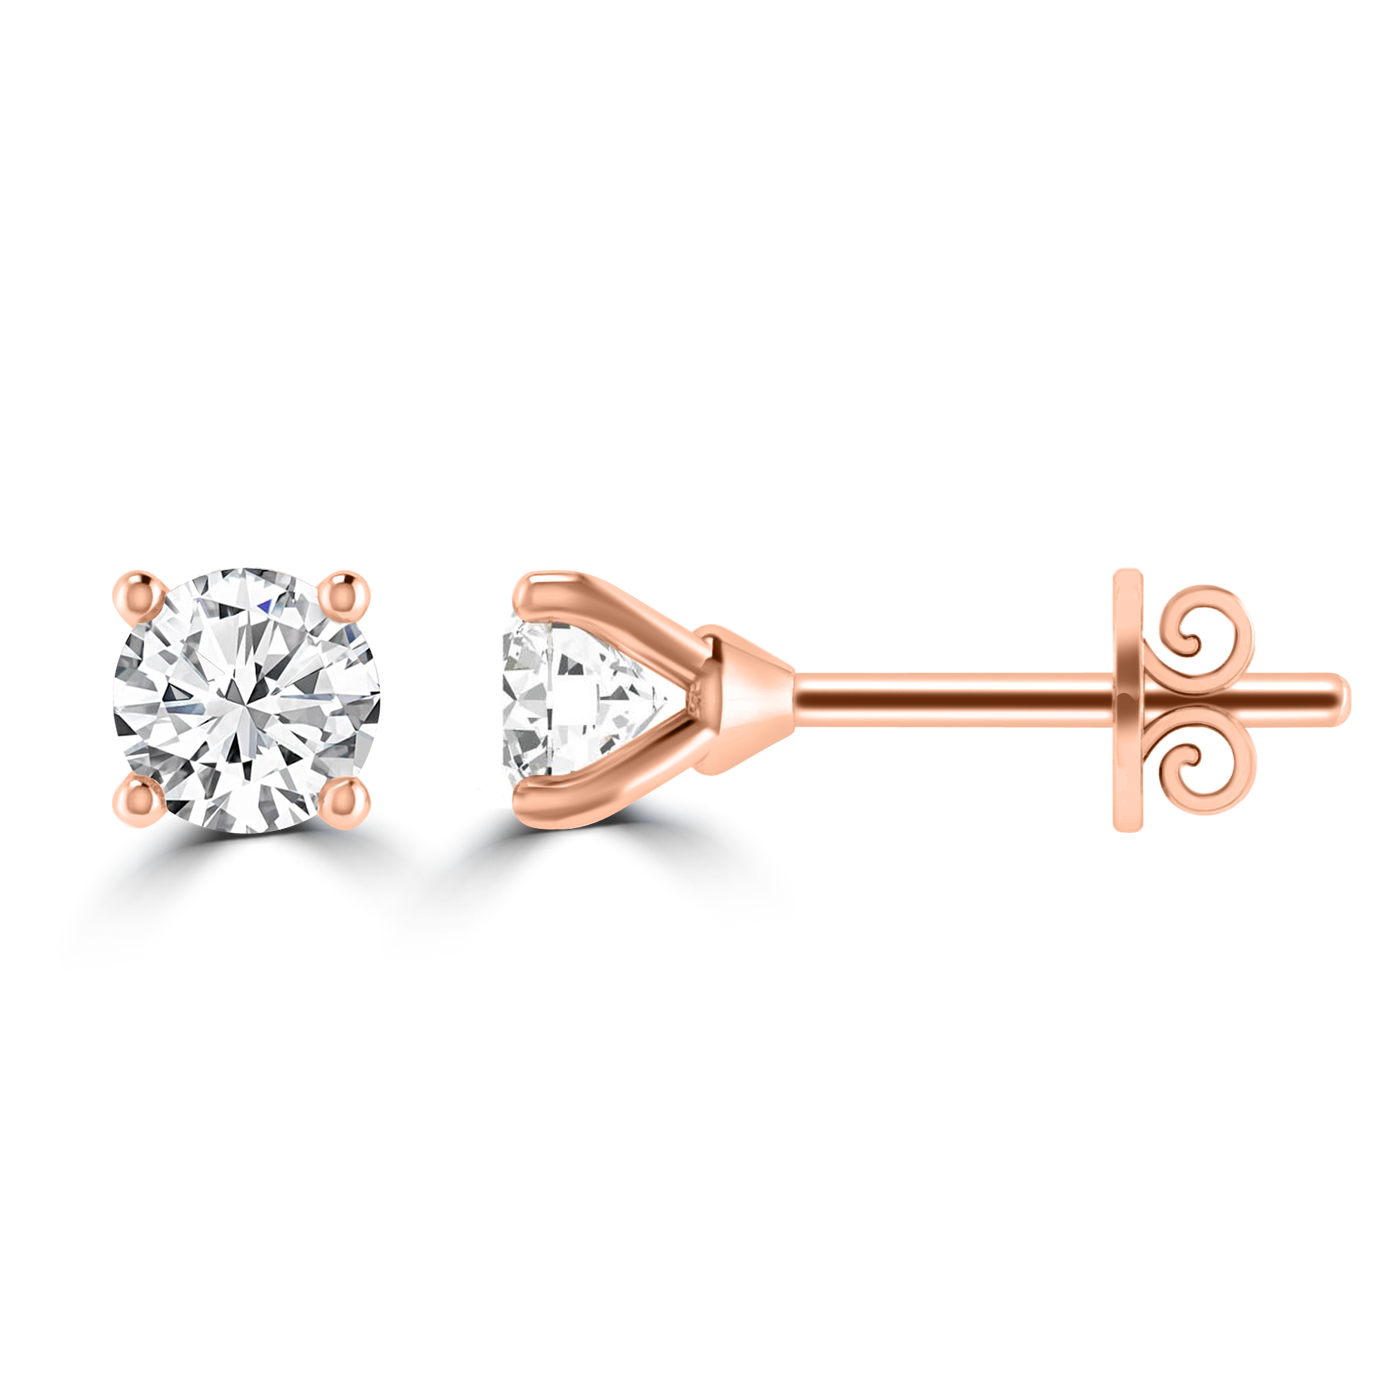 0.33ct GH I1 Diamond 4 Claw Studs in 9K Rose Gold